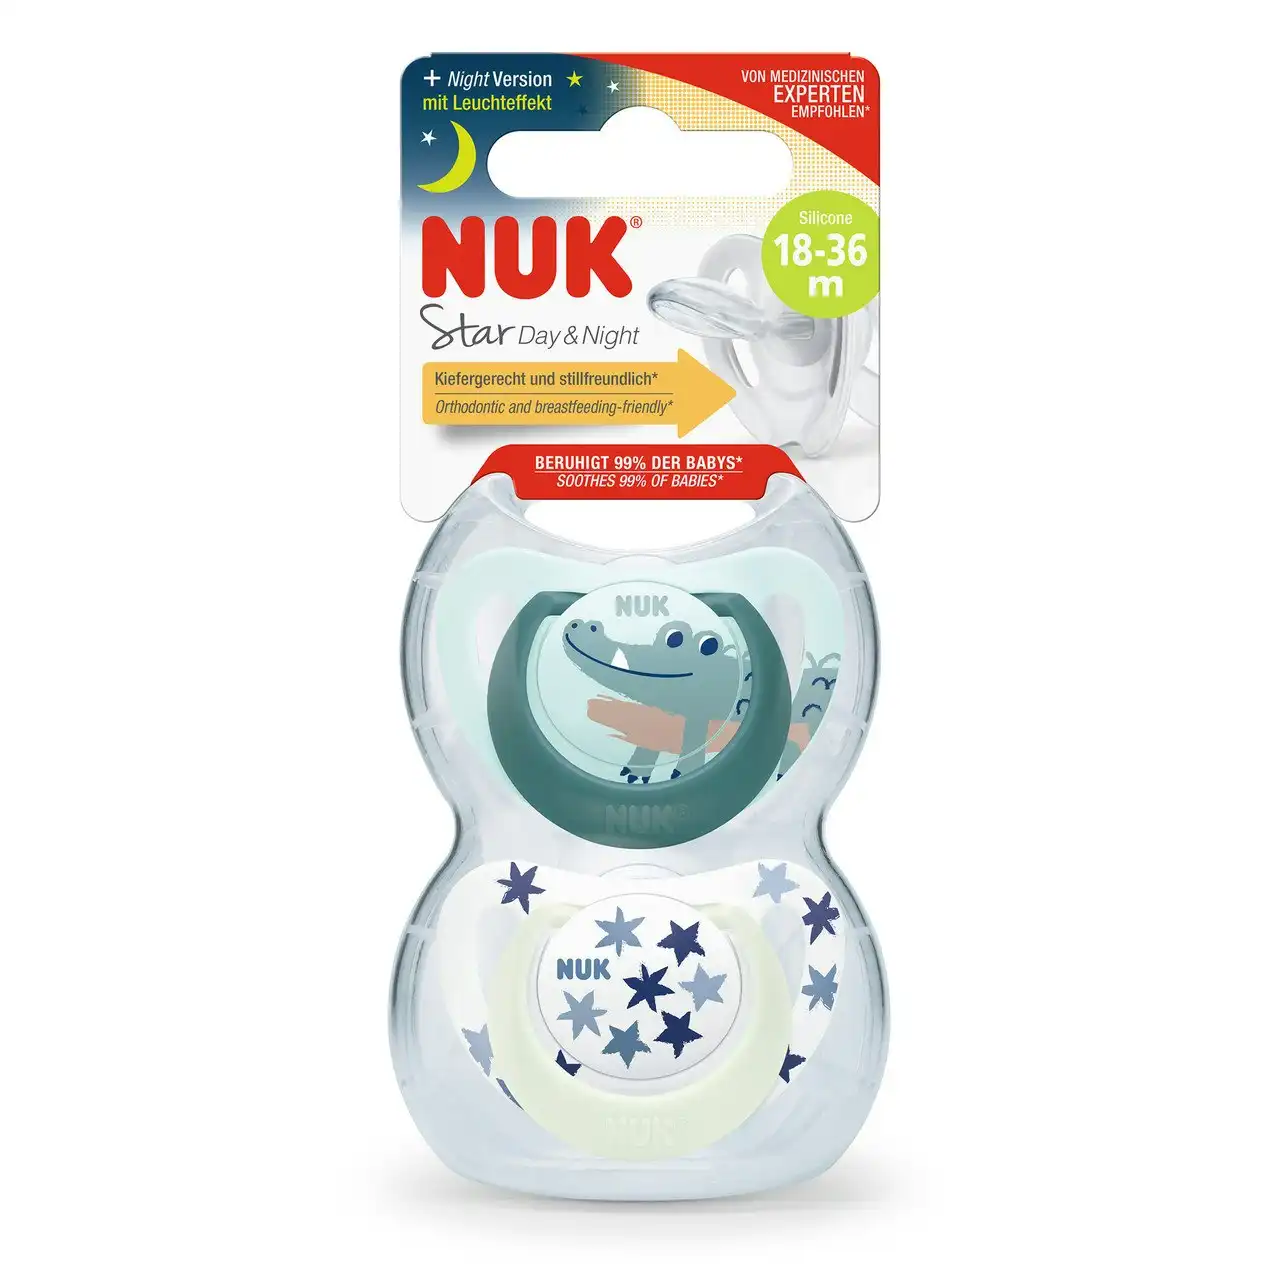 NUK Star Night Baby Dummy 18-36m, Glow-In-The-Dark, BPA-Free Silicone, 2 Pack - Assorted